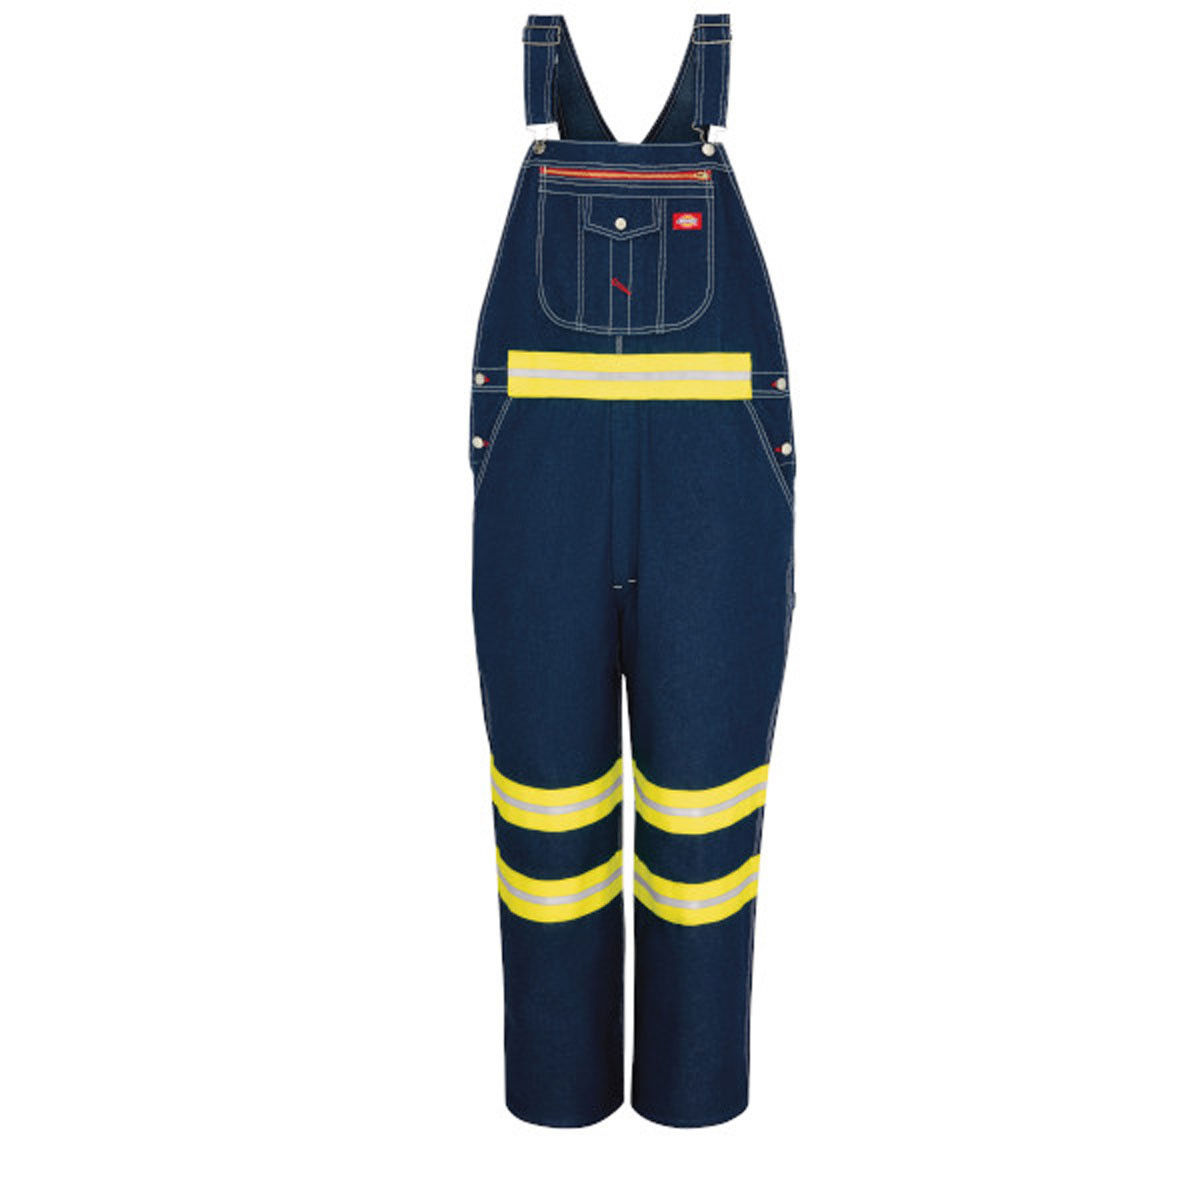 What's the key feature of the Dickies® Enhanced Visibility Denim Bib Overall?